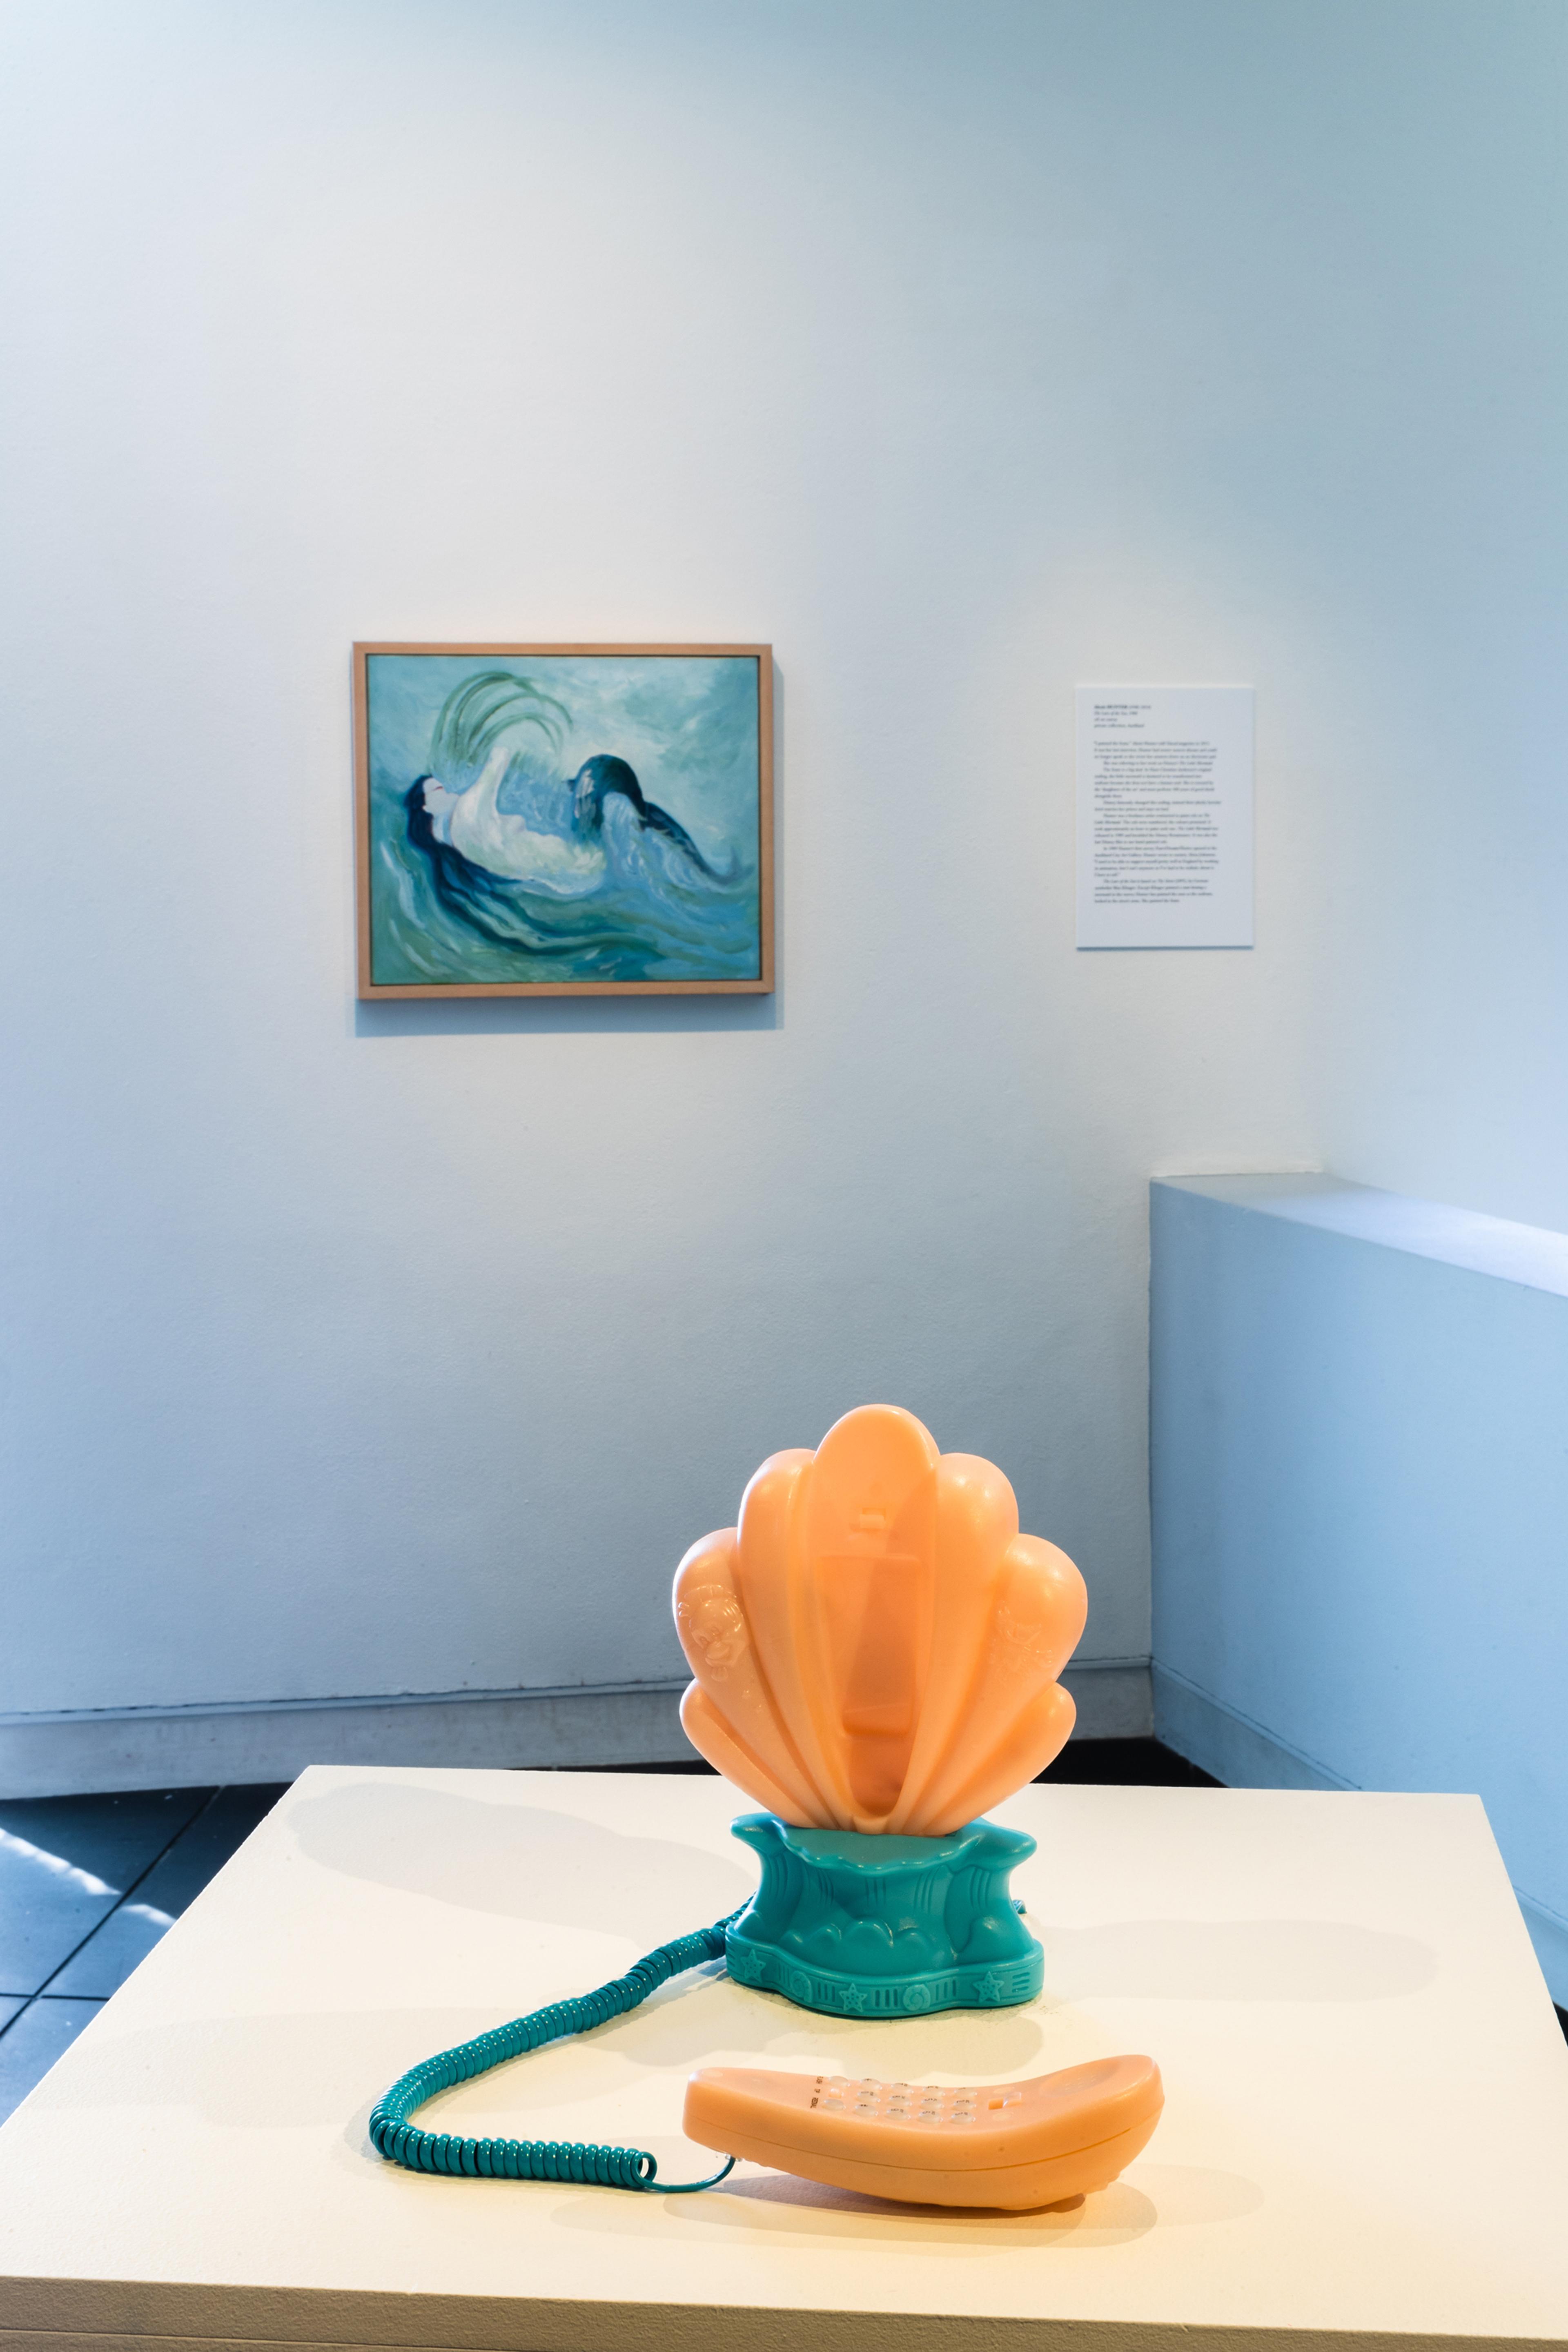 Alexis Hunter (1948–2014), The Lure of the Sea, 1988, oil on canvas, private collection, Auckland; Megan Dunn, I’ve Heard the Mermaids…, 2022, recorded sound, novelty telephone, collection of Megan Dunn. Installation view, Megan Dunn: The Mermaid Chronicles, Te Pātaka Toi Adam Art Gallery, Te Herenga Waka Victoria University of Wellington, 2022. Photo: Ted Whitaker